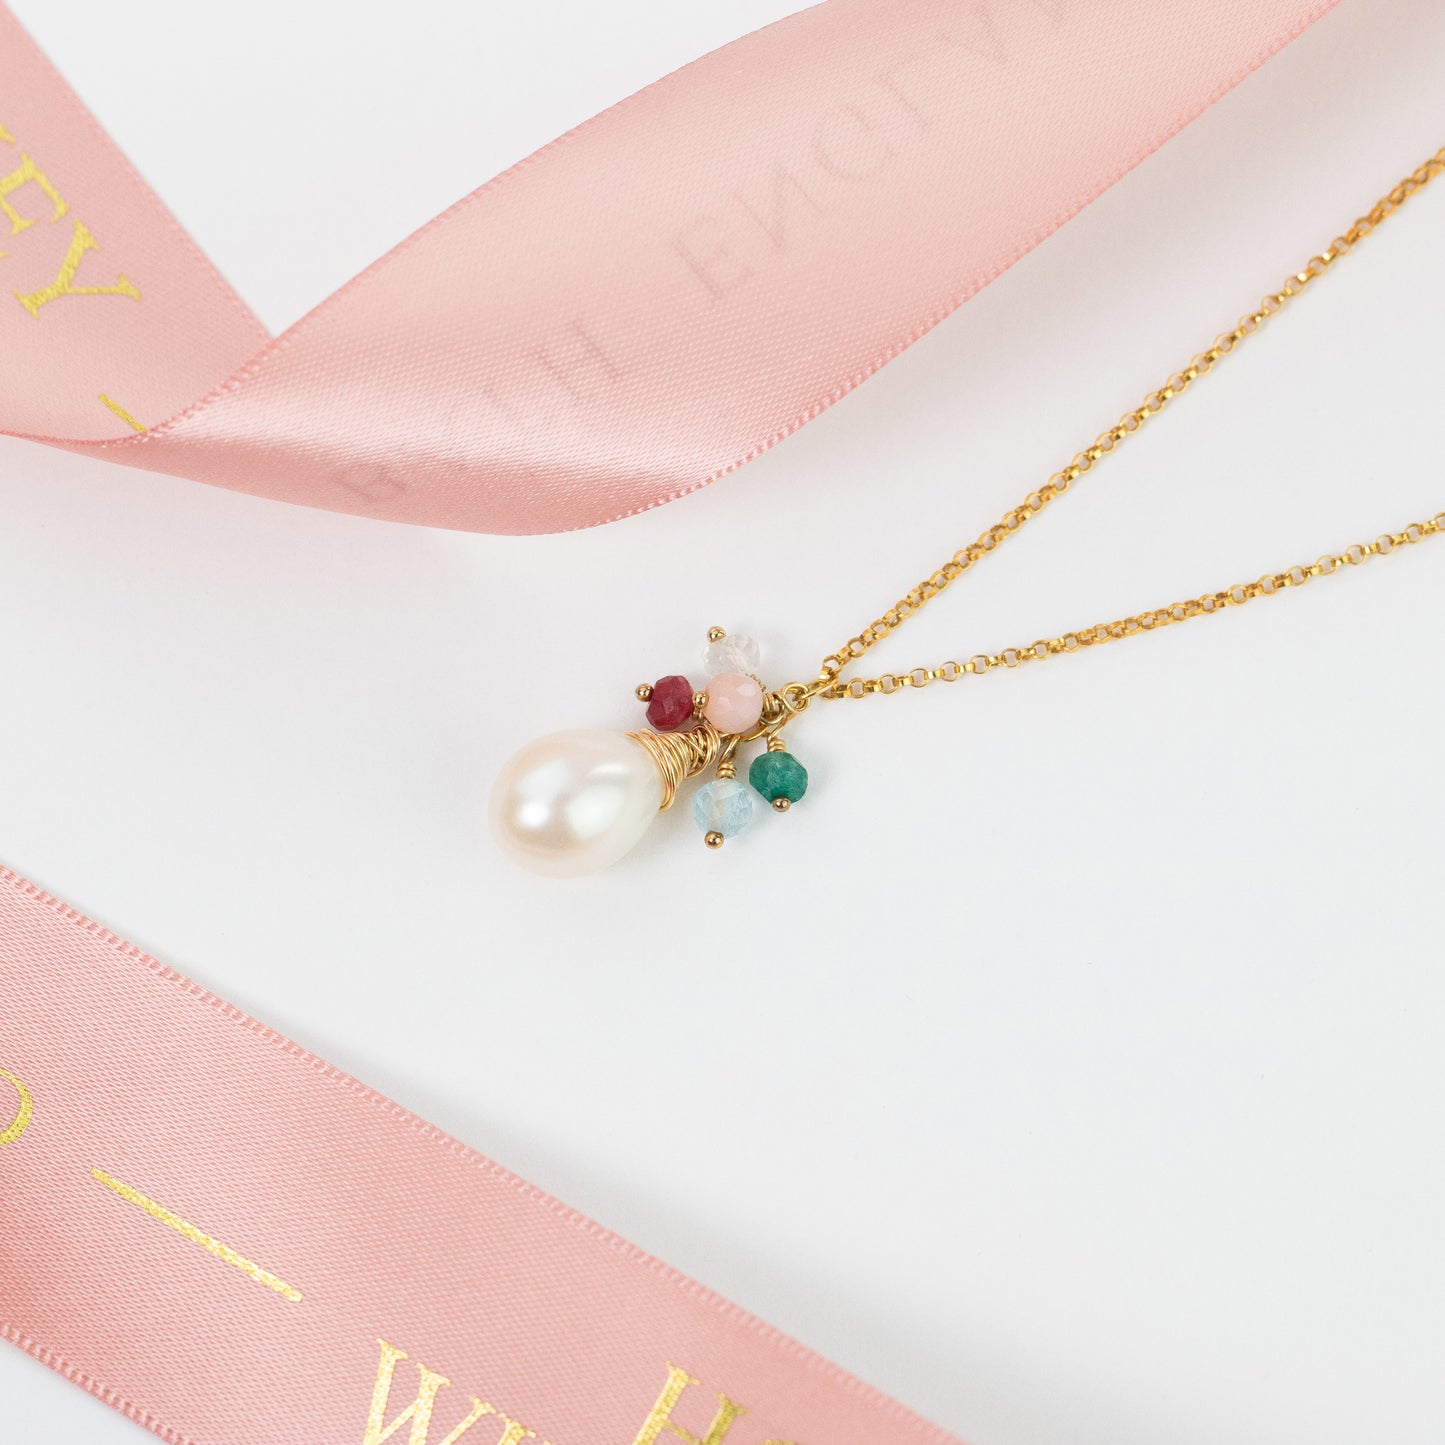 Family Birthstone Necklace with Freshwater Pearl - Silver & Gold